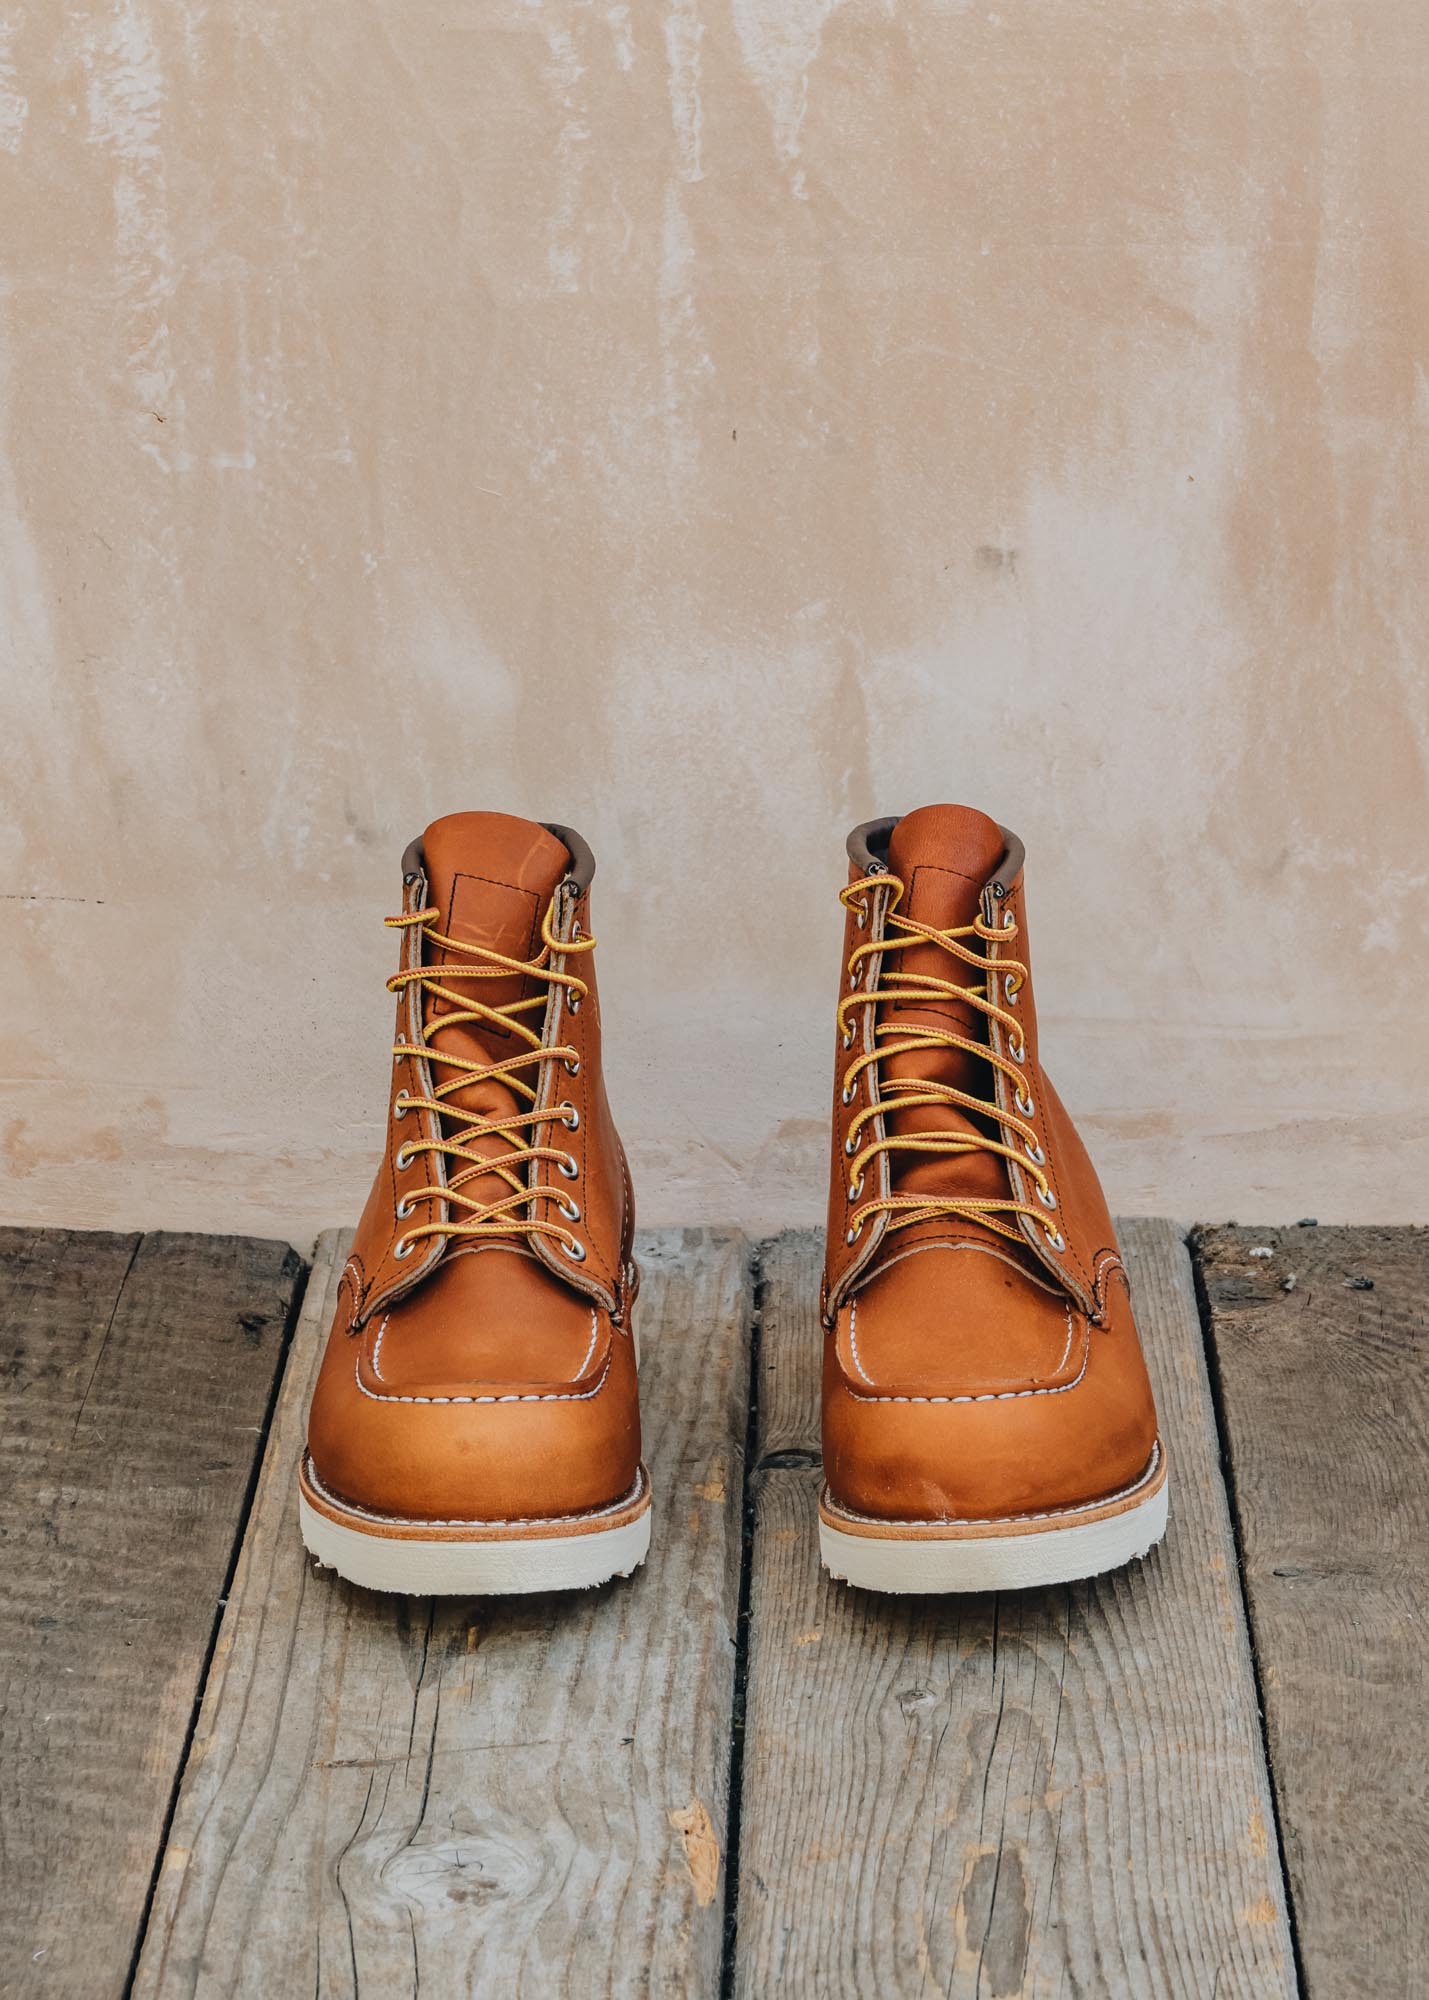 Red Wing Classic Moc Toe Boots in Oro Legacy